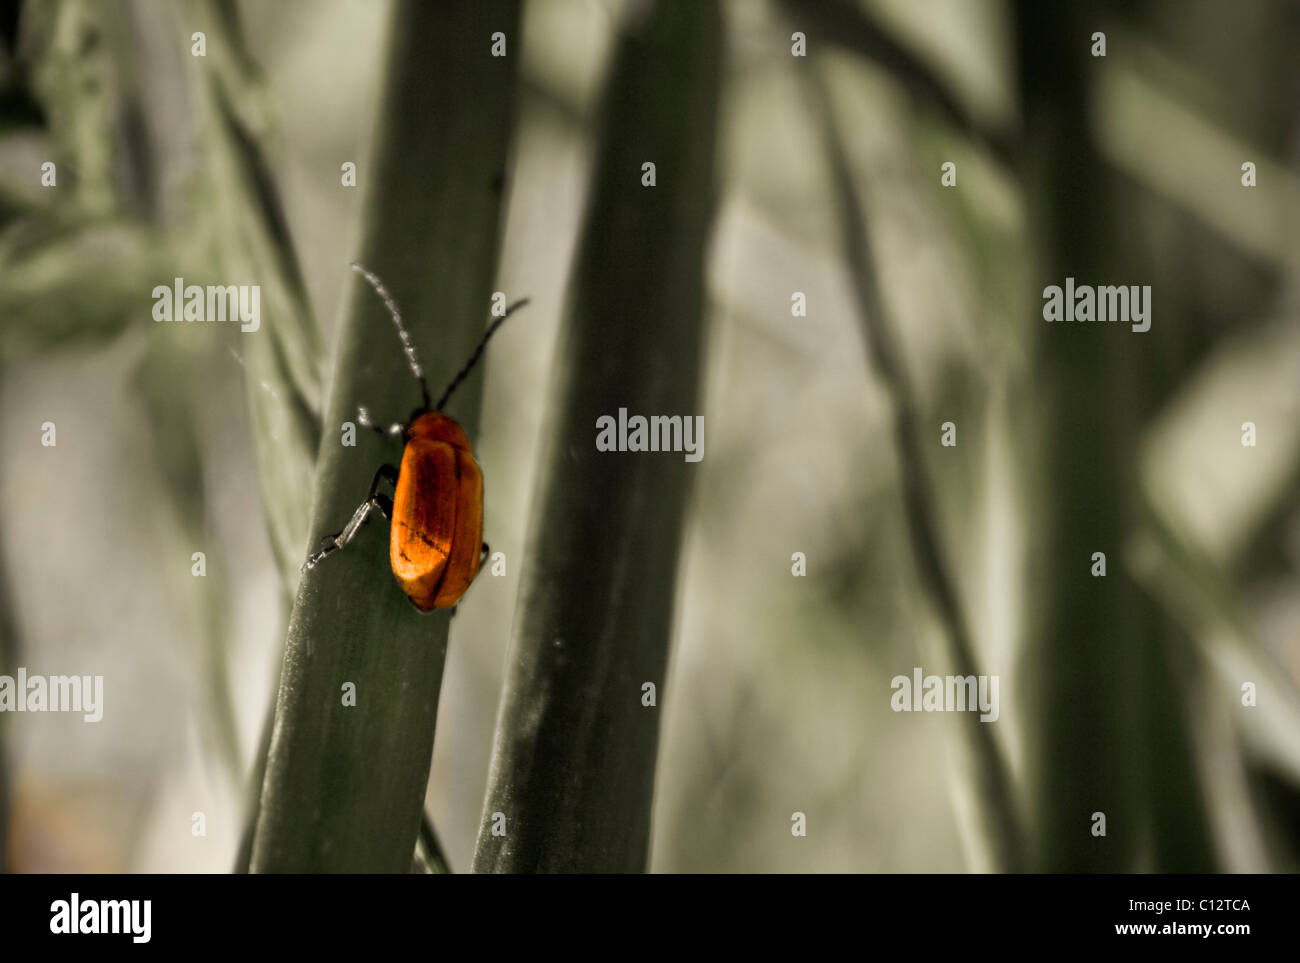 Insect crawling on plant stem Stock Photo